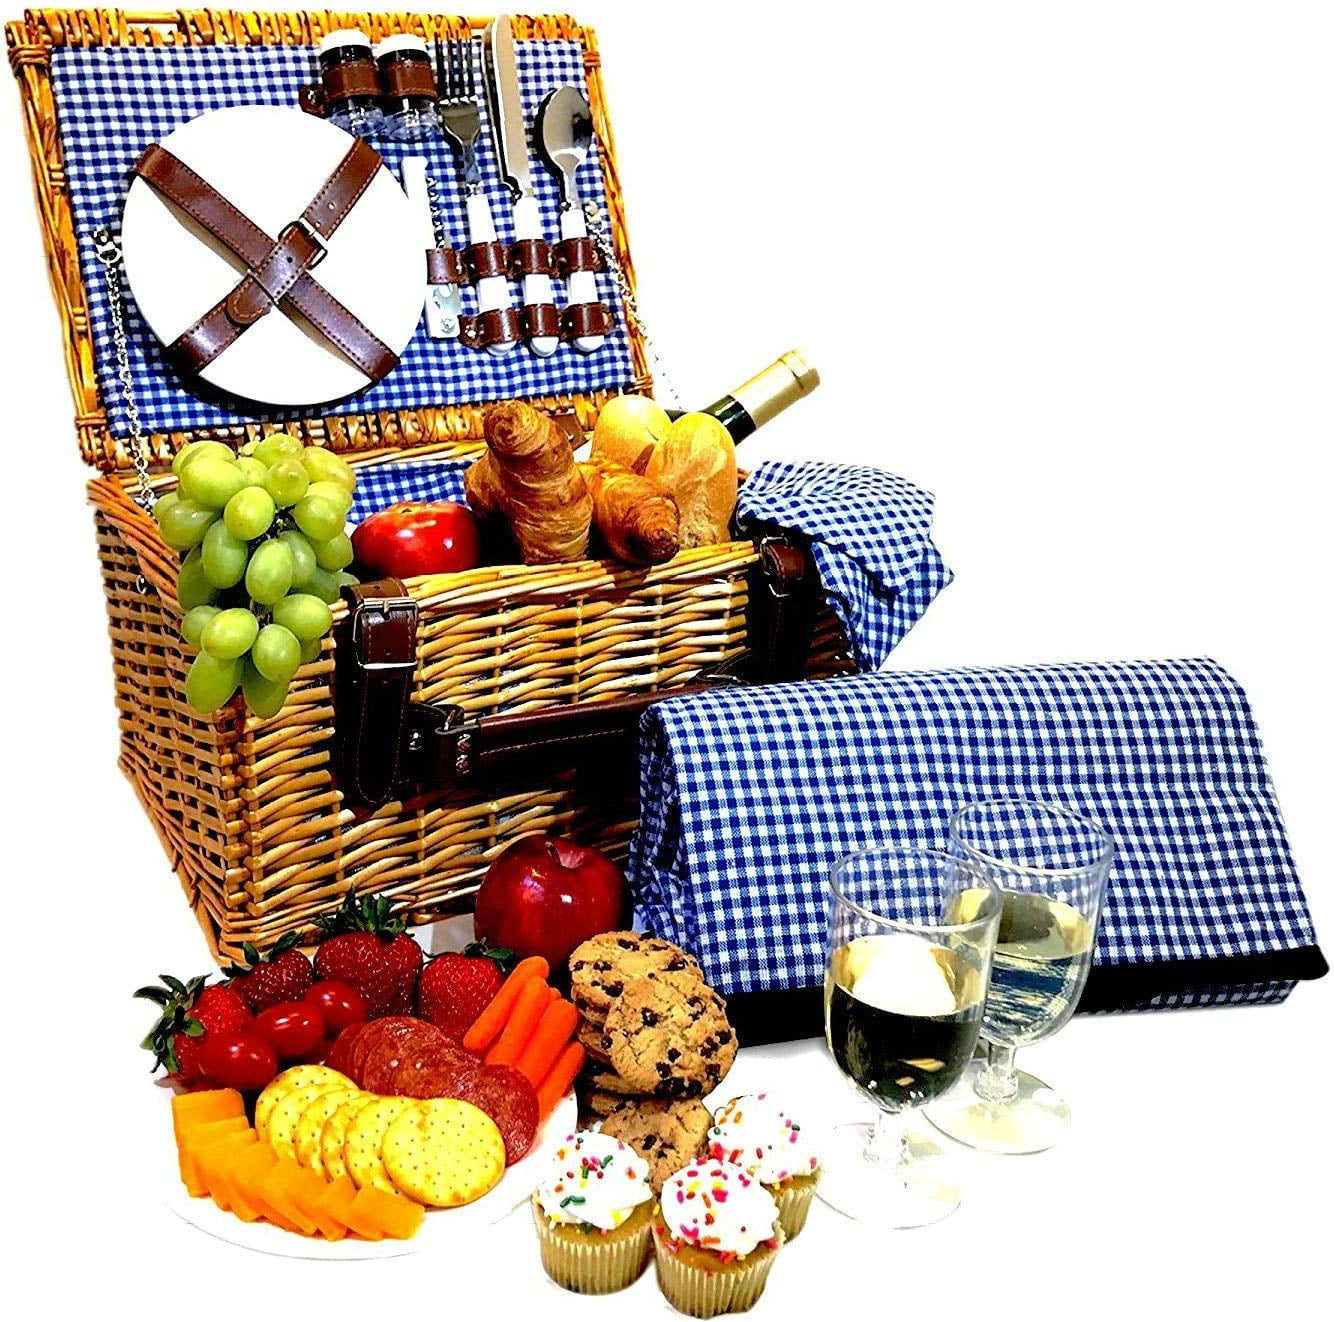 Outdoor Thanks Giving Willow Picnic Service Gift Set for Camping Chiristmas. Birthday Picnic Basket for 2，Picnic Set Hamper with Waterproof Picnic Blanket Valentine Day